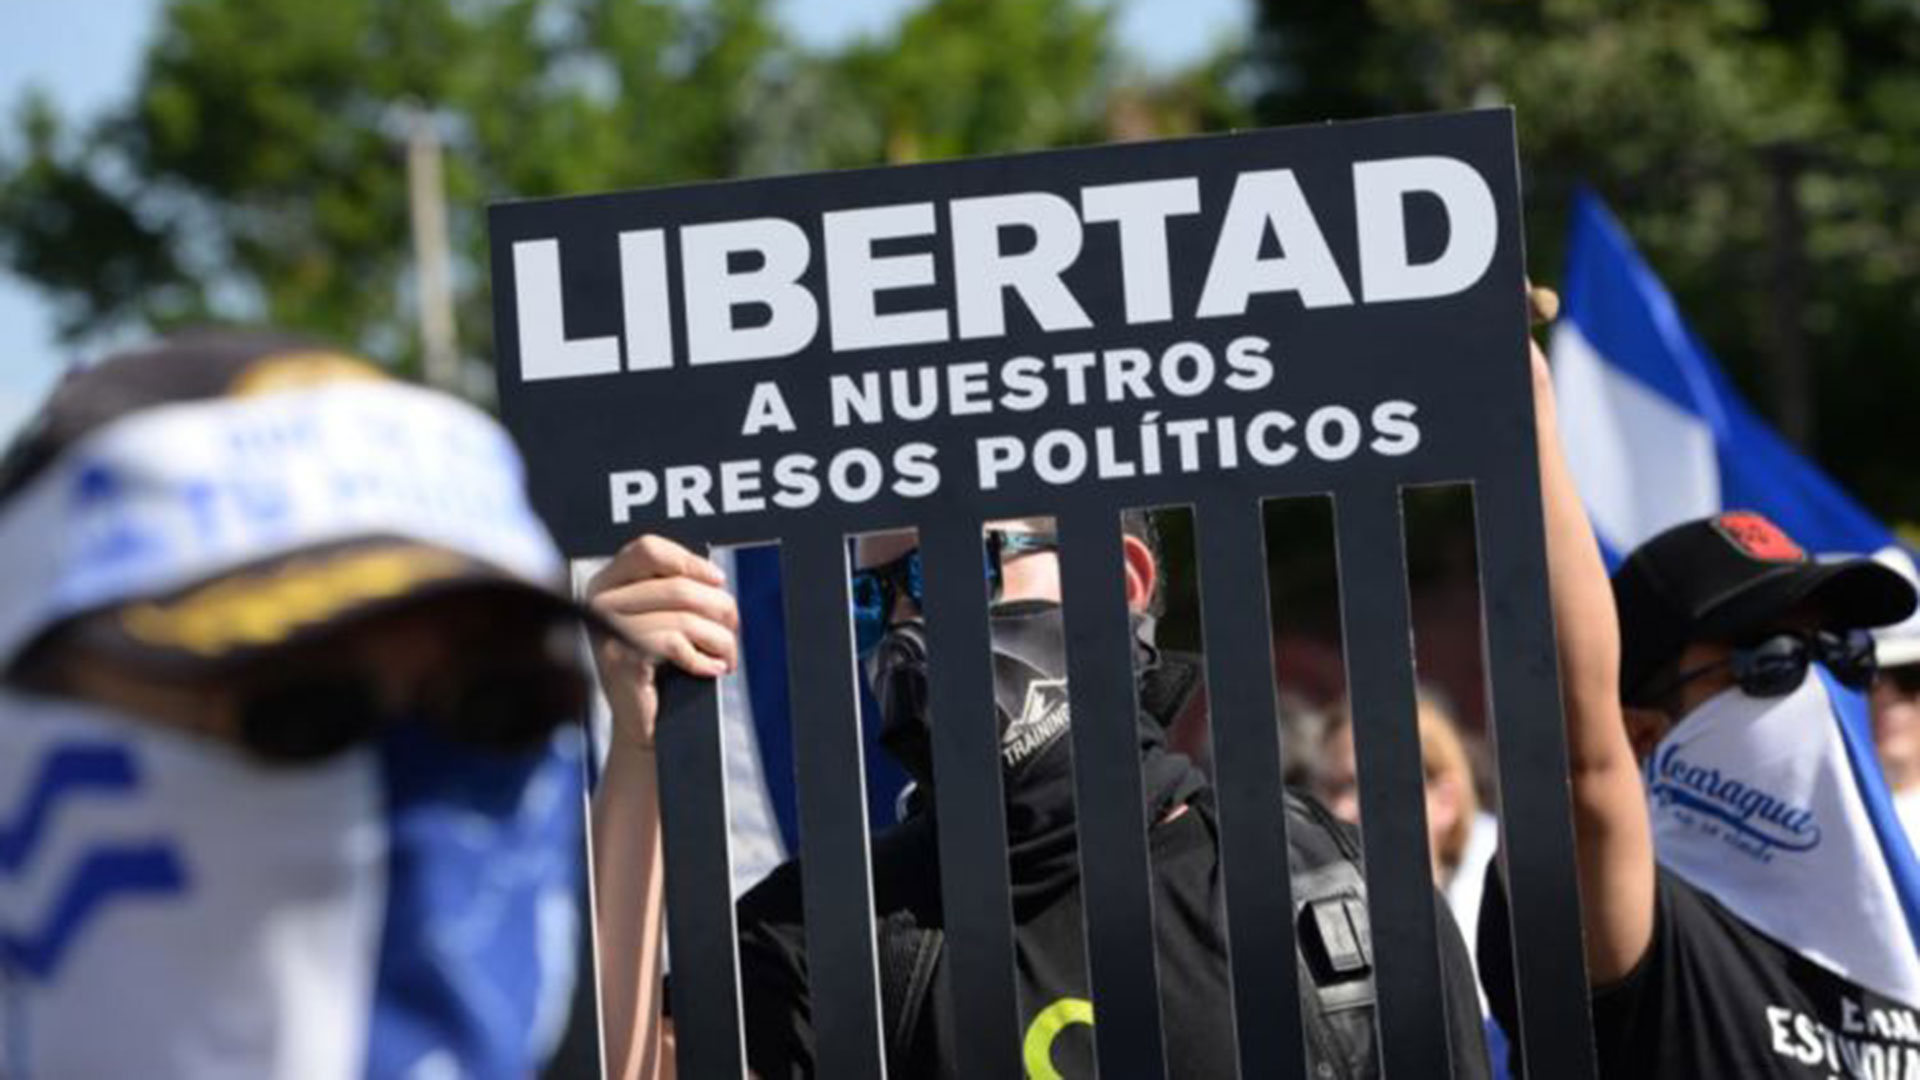 They denounce "brutal beating" against two political prisoners from Waswalí who joined a hunger strike